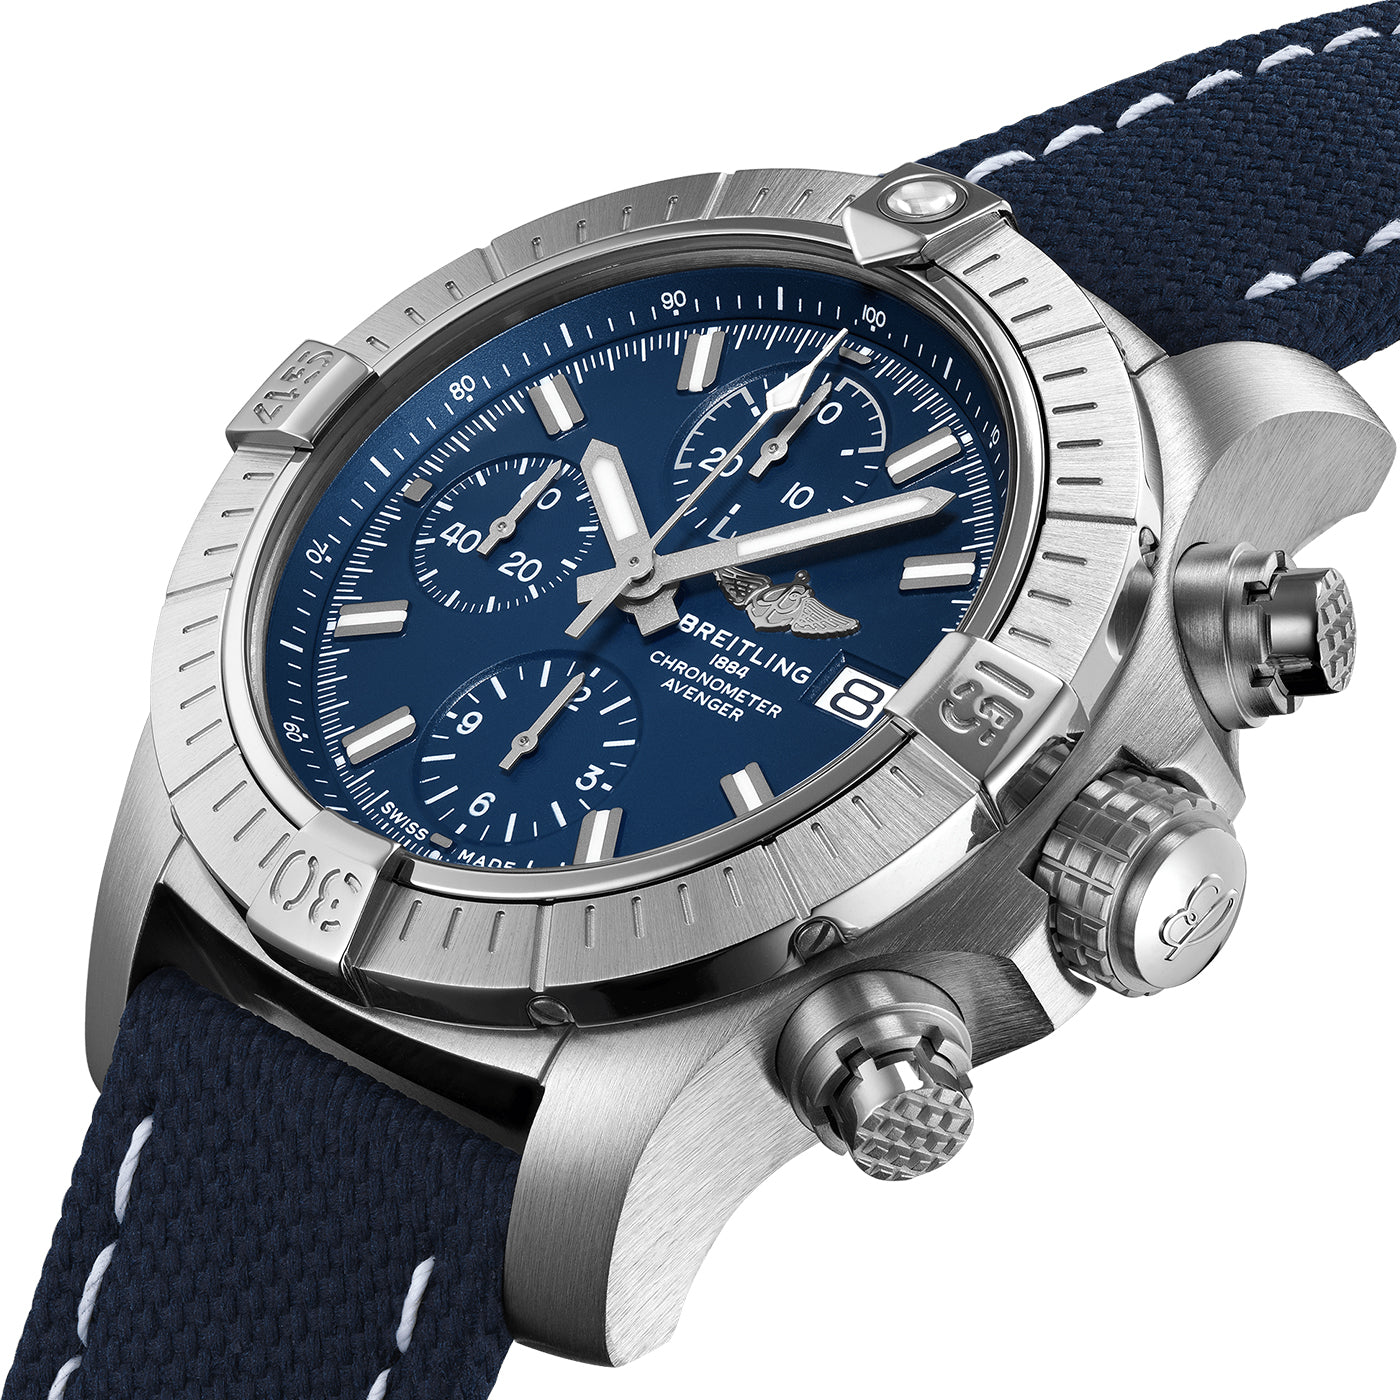 Avenger Chronograph 43mm Blue Dial Automatic Strap Watch